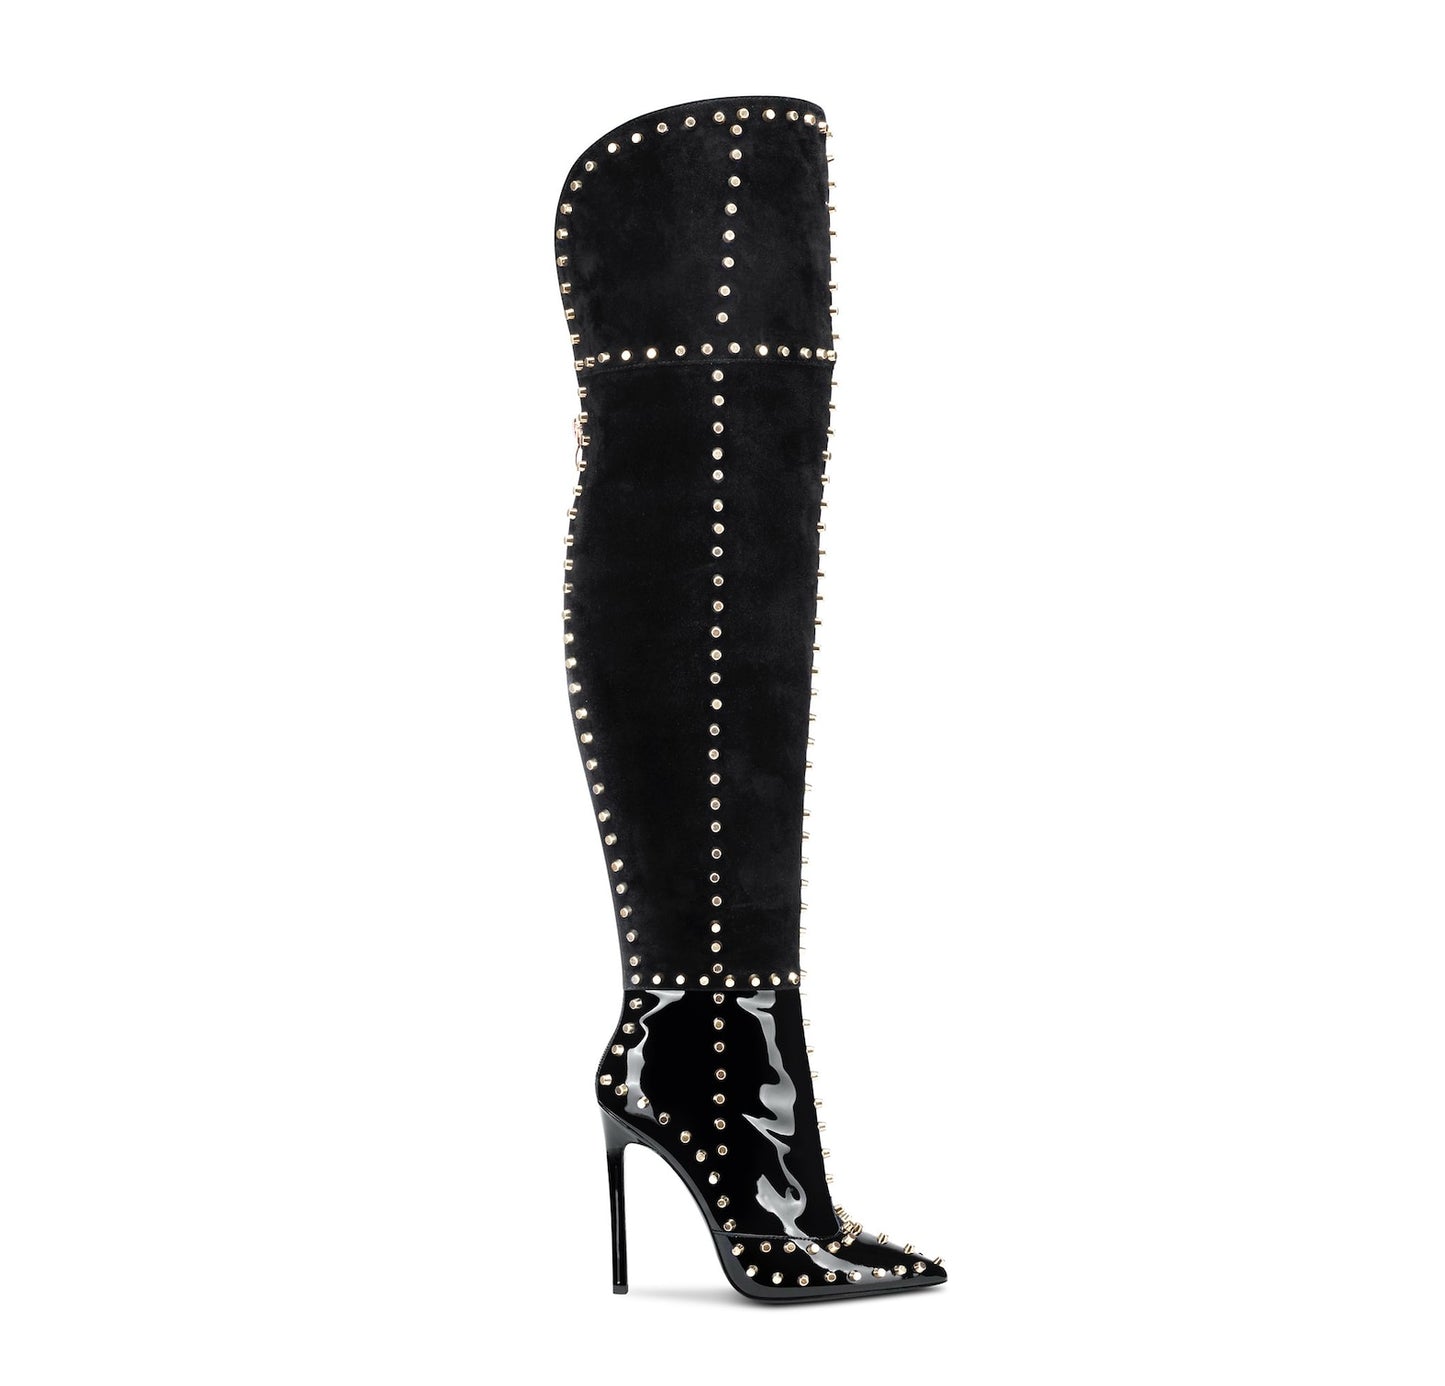 Rivet Over The Knee Boots